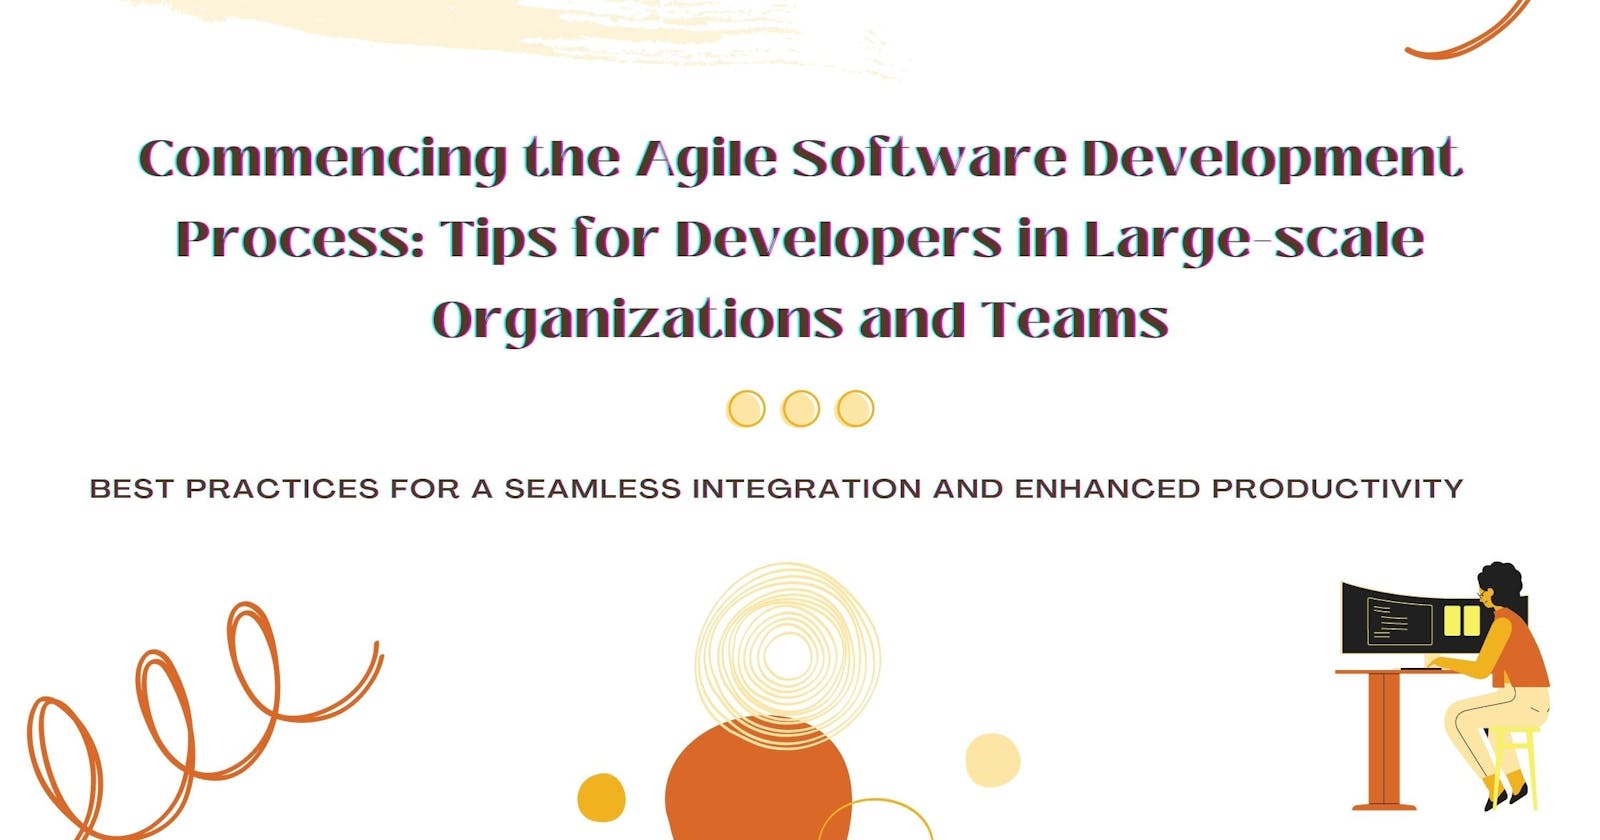 Commencing the Agile Software Development Process: Tips for Developers in Large-scale Organizations and Teams